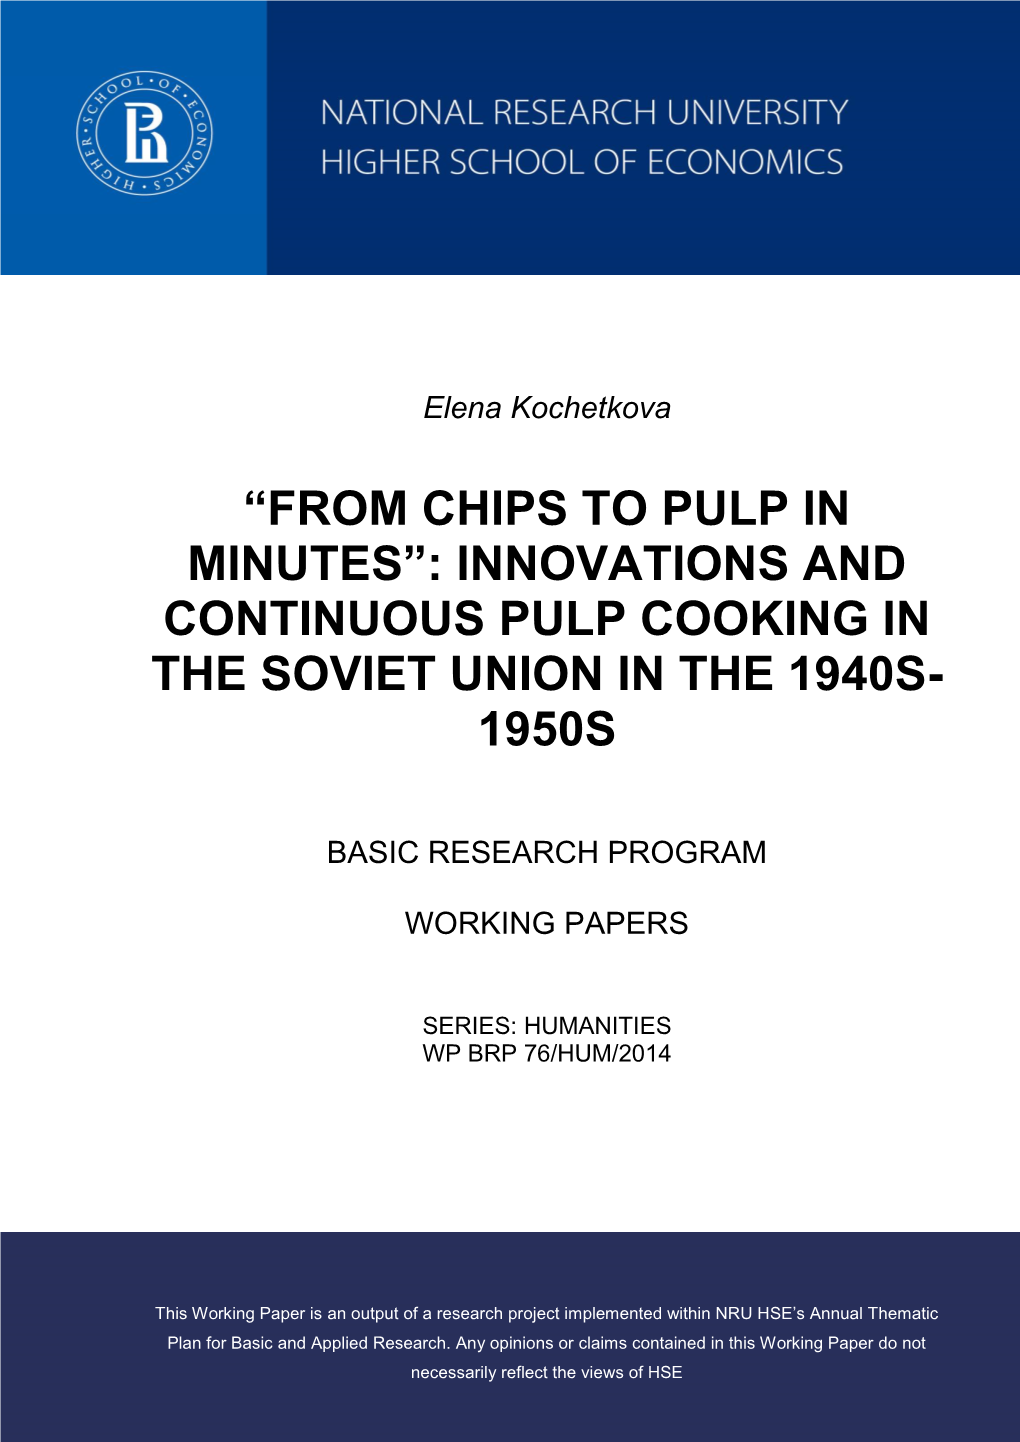 “From Chips to Pulp in Minutes”: Innovations and Continuous Pulp Cooking in the Soviet Union in the 1940S- 1950S